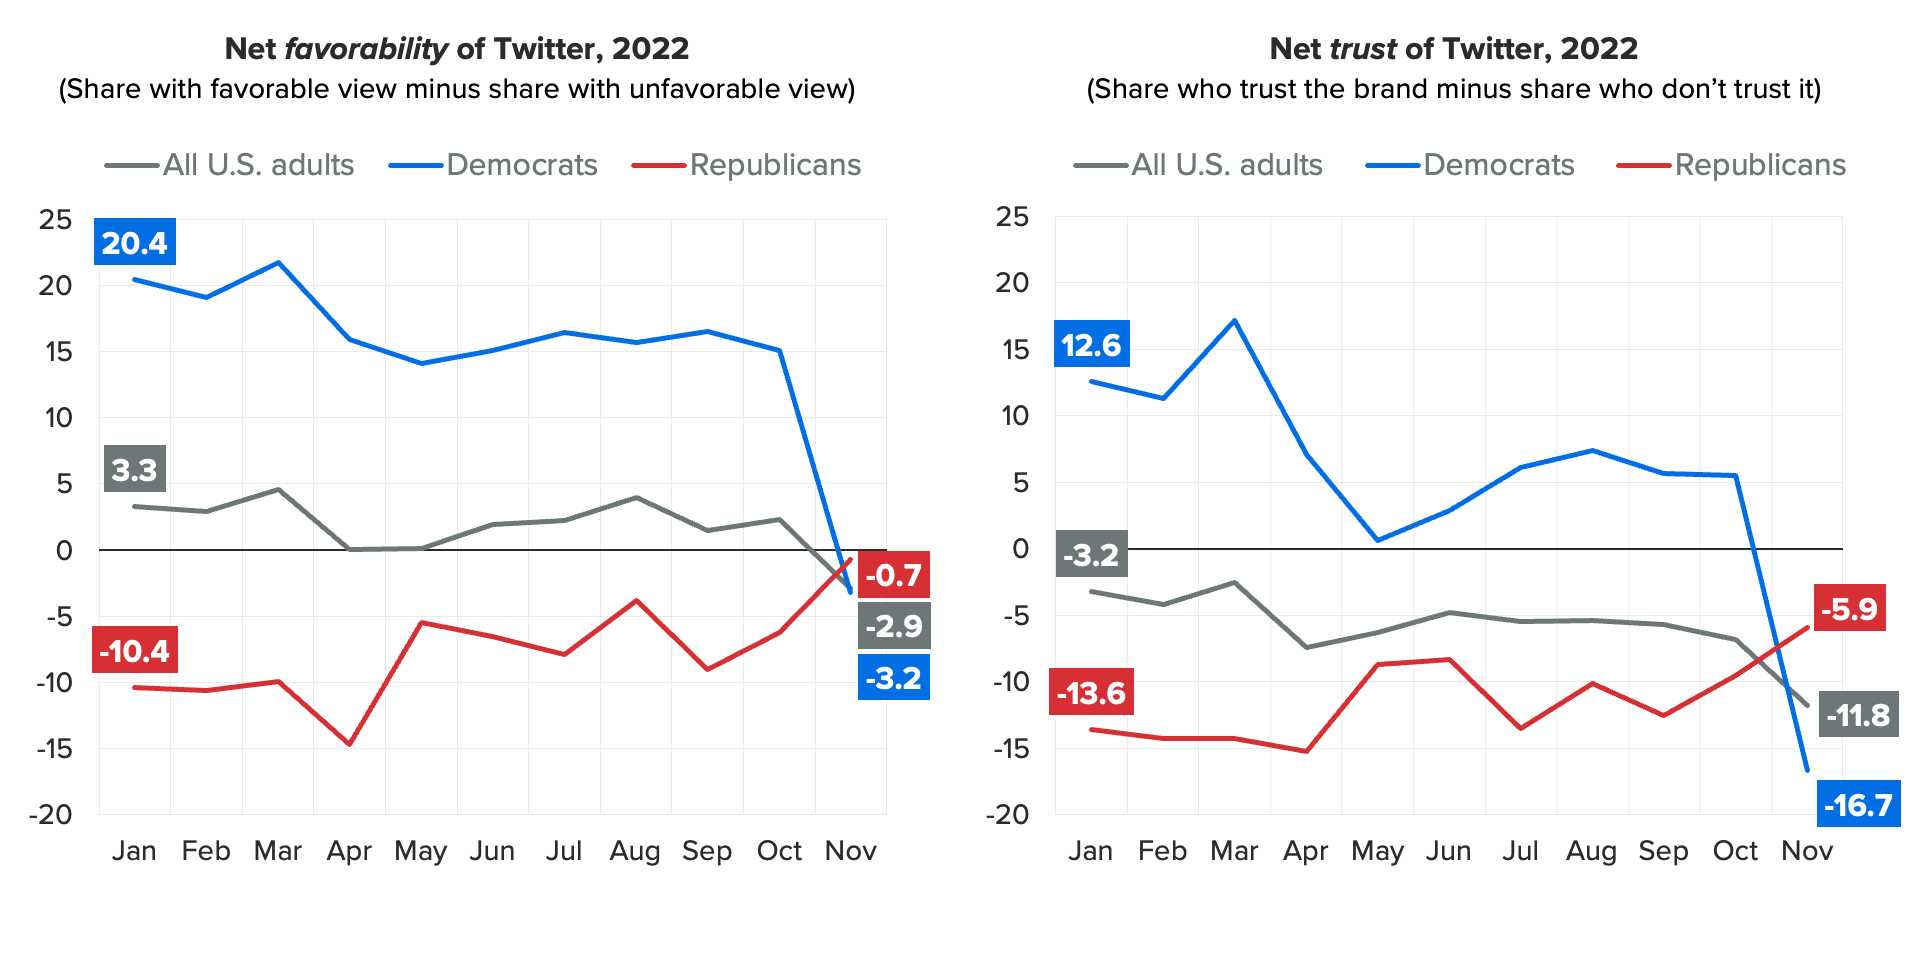 Line charts of the net favorability and net trust of Twitter, showing favorability and trust has risen among Republicans and fallen among Democrats.